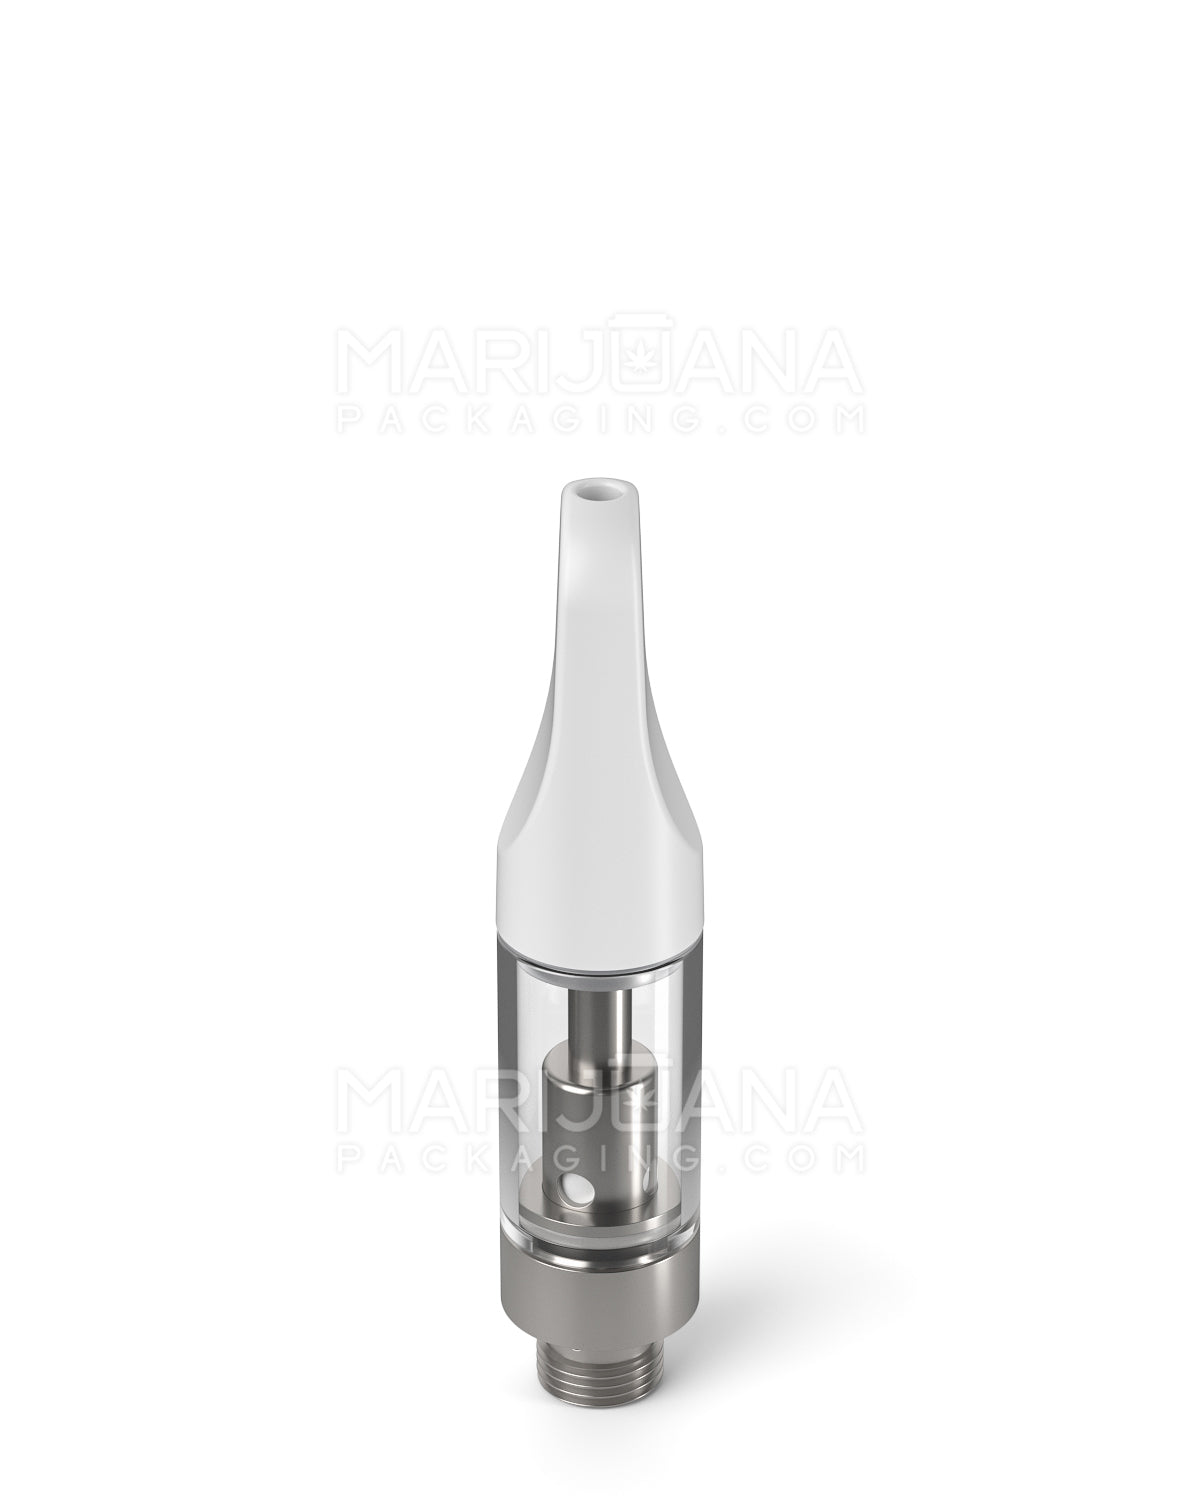 CCELL | Liquid6 Reactor Glass Vape Cartridge with White Plastic Mouthpiece | 0.5mL - Screw On - 100 Count - 4